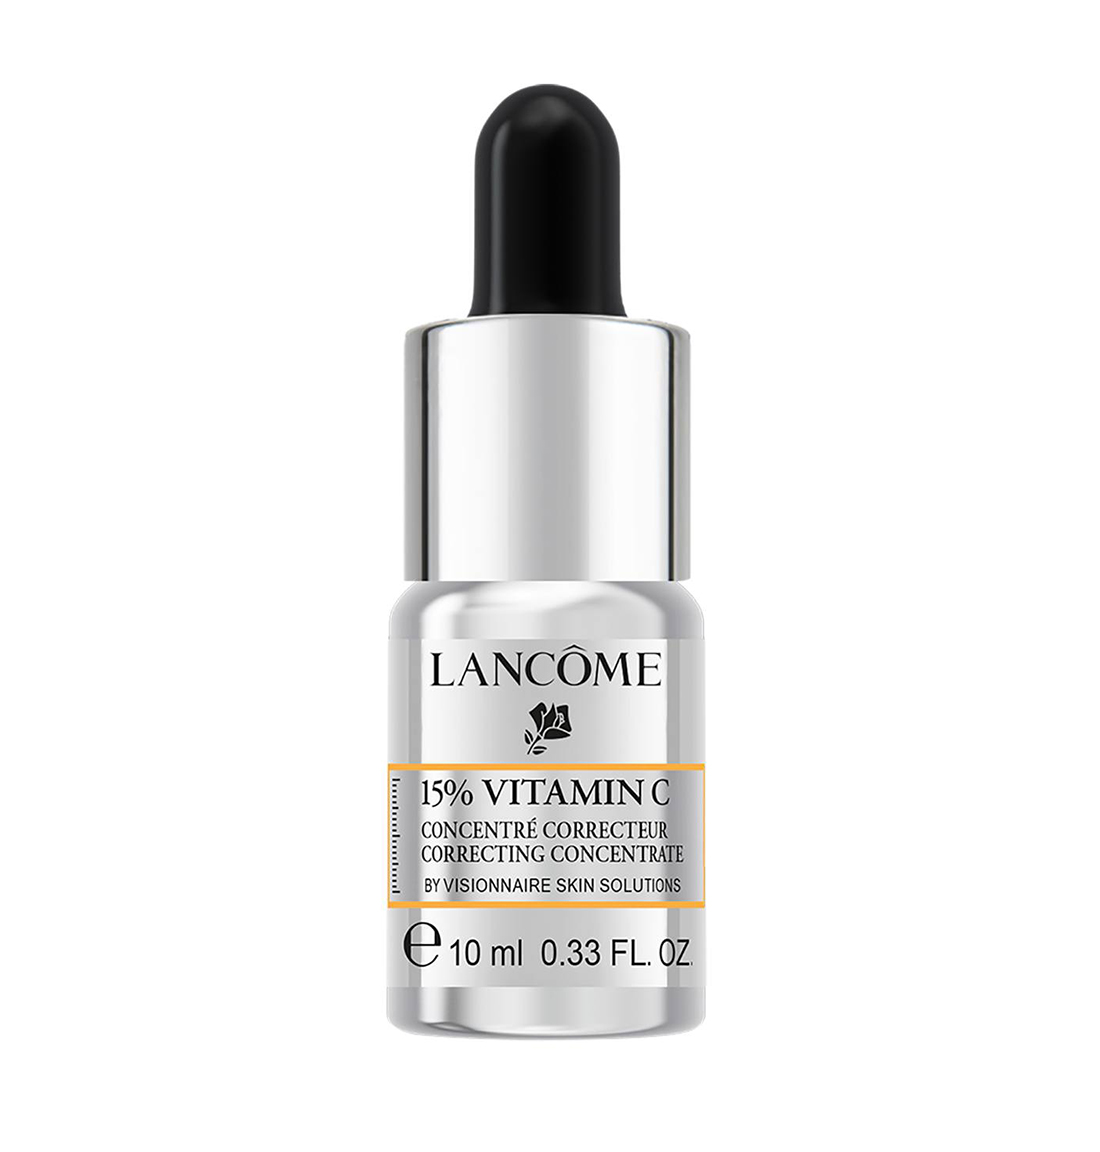 Visionnaire Skin Solutions 15 % vitamin C от Lancome